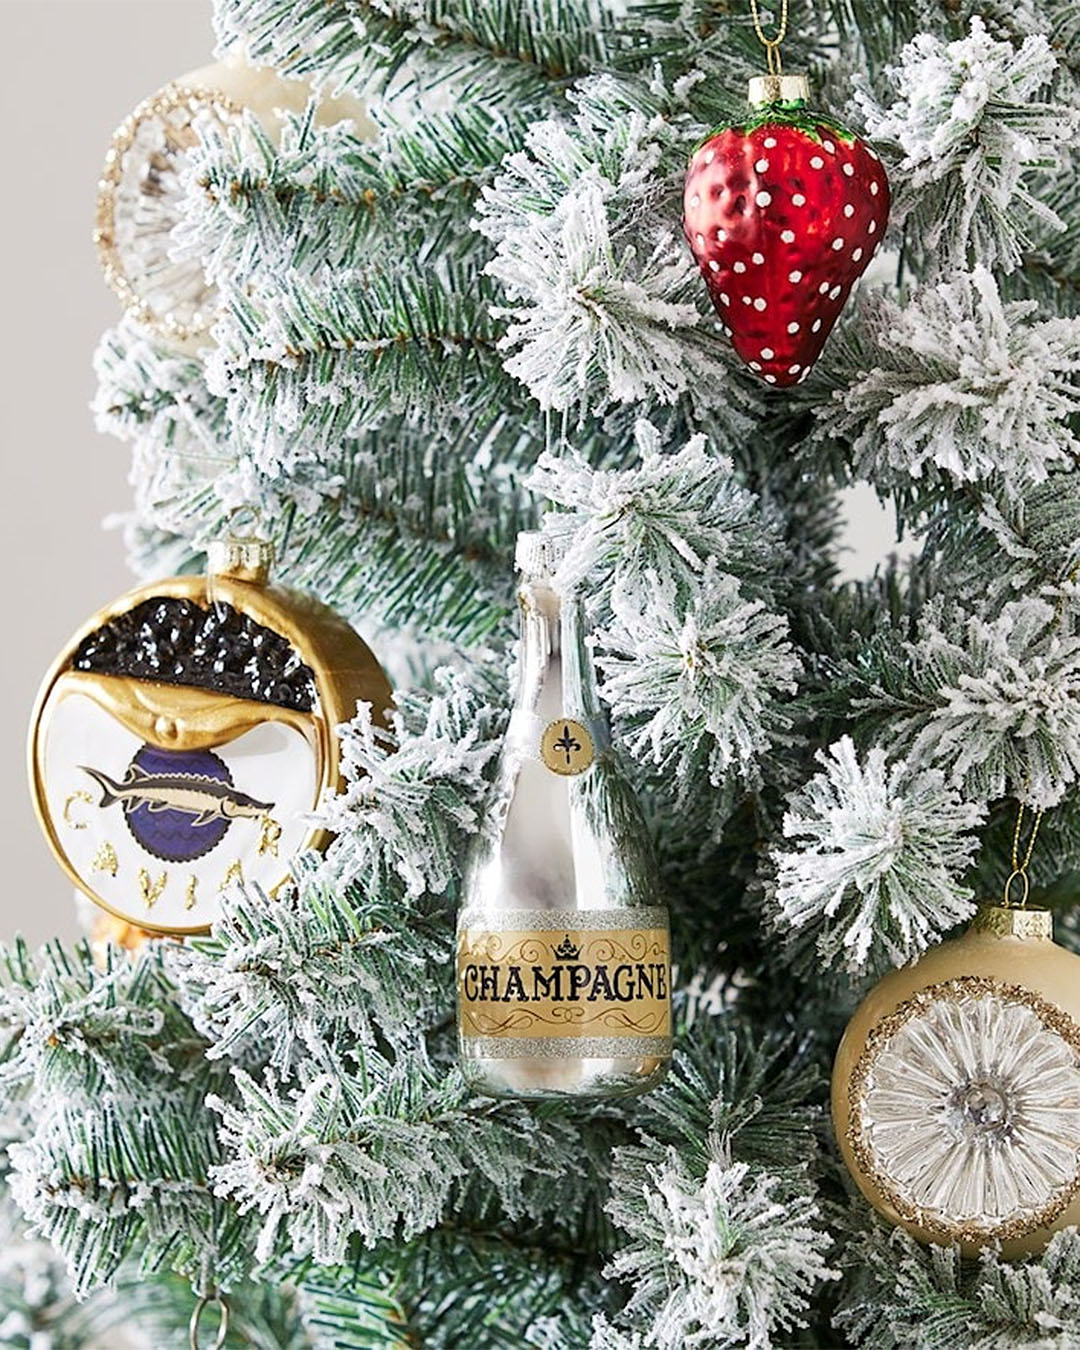 Caviar and champagne christmas decorations on a tree.